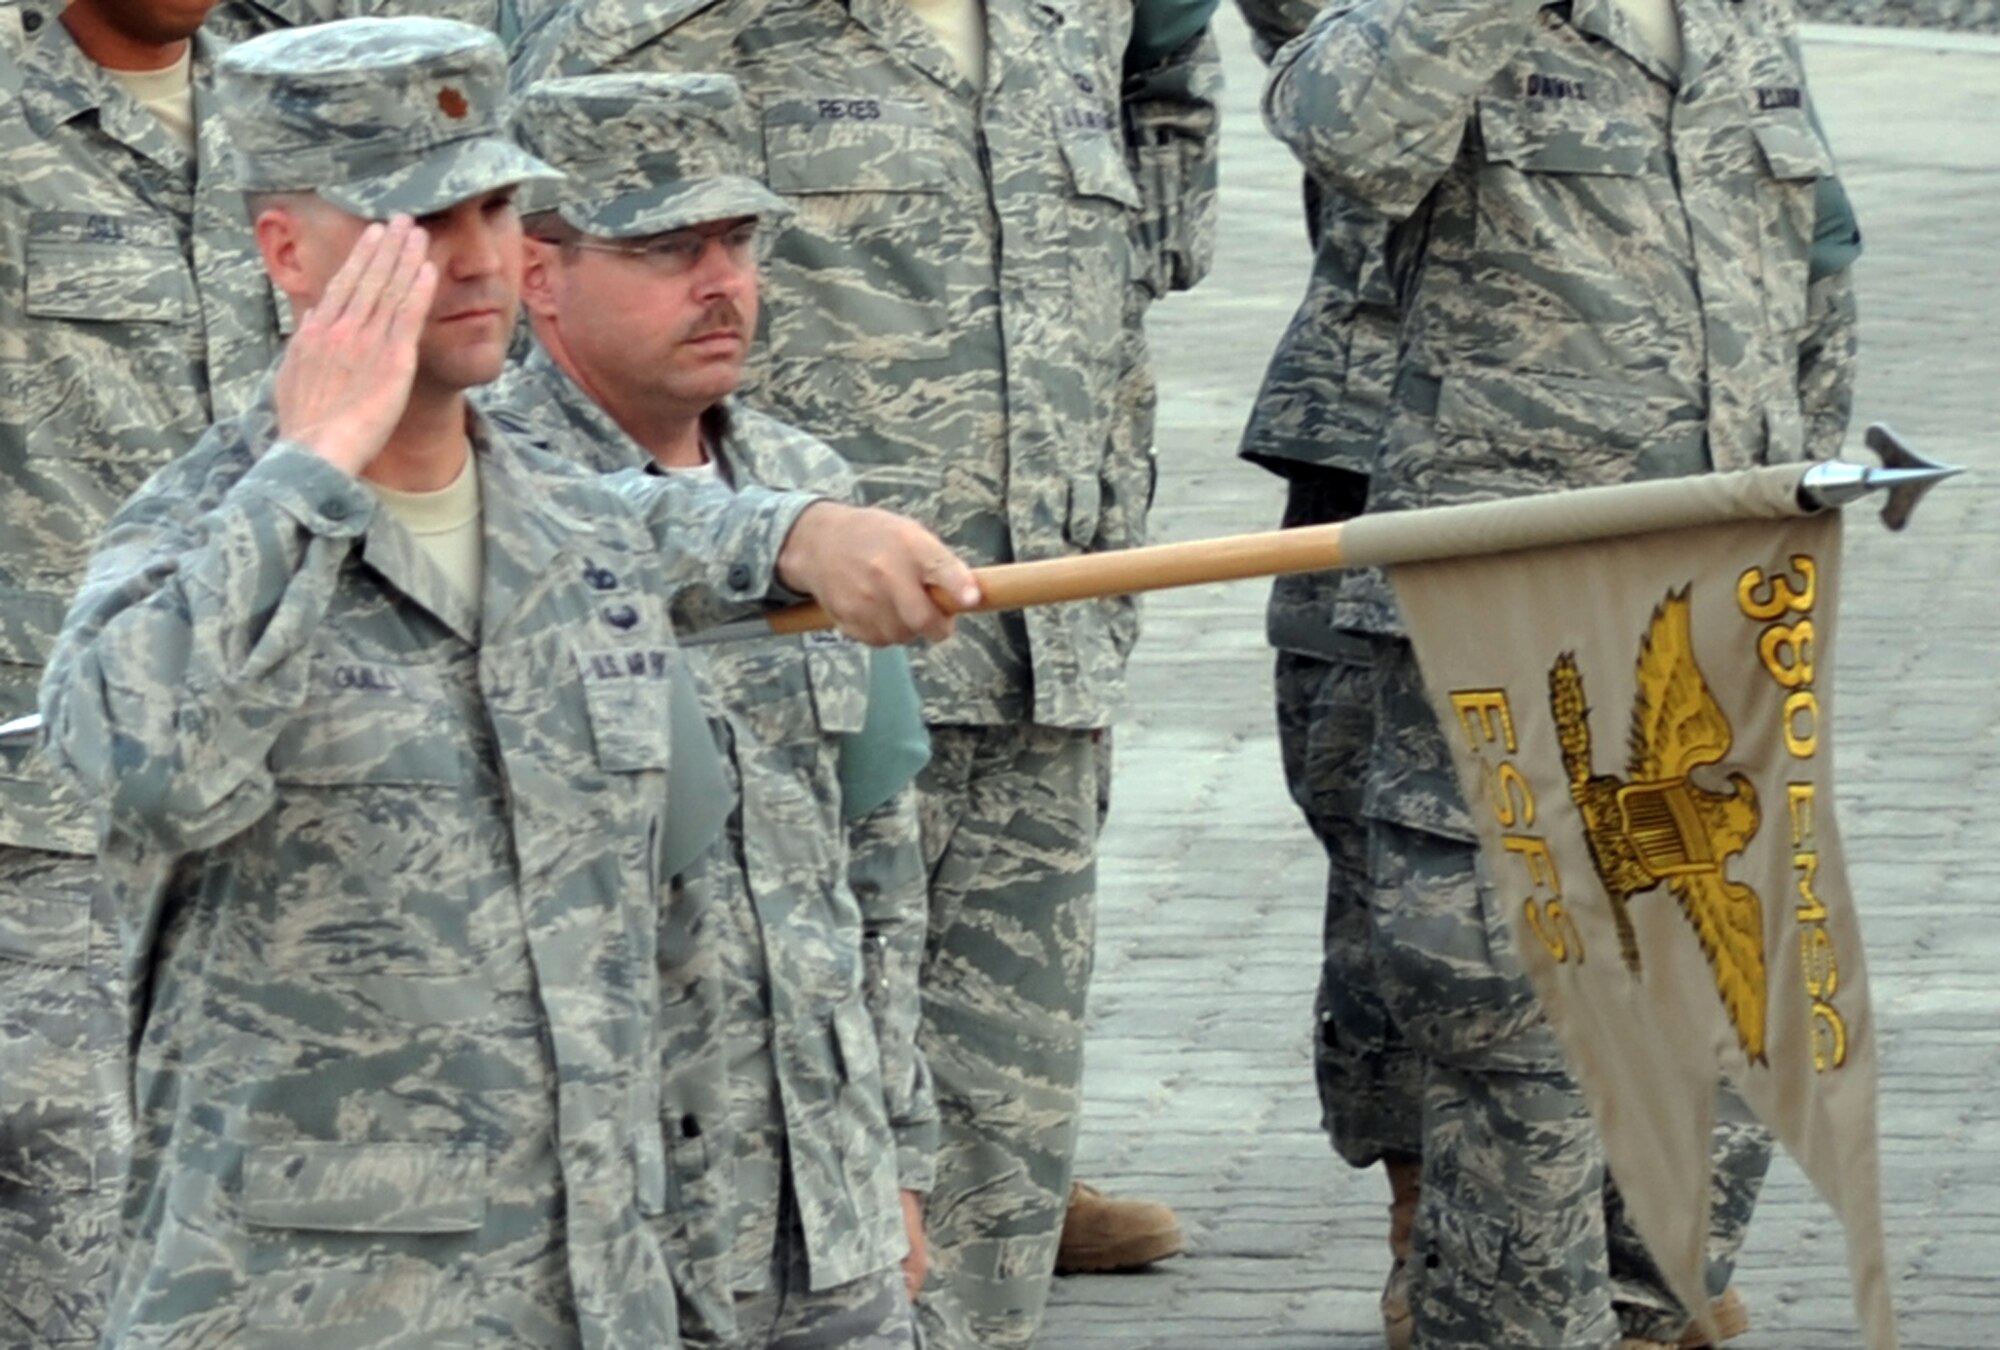 Maj. Aaron Guill, 380th Expeditionary Security Forces Squadron commander, and Chief Master Sgt. Timothy Standish, 380th ESFS chief enlisted manager, and other Airmen from the 380th Air Expeditionary Wing participate in a wing retreat ceremony at a non-disclosed base in Southwest Asia on April 23, 2010.  The 380th ESFS served as the lead formation for the ceremony. Each week, the 380th AEW pays tribute to the American flag and what it stands for by holding the wing-wide ceremony with various units leading the retreat each week.  (U.S. Air Force Photo/Master Sgt. Scott T. Sturkol/Released)